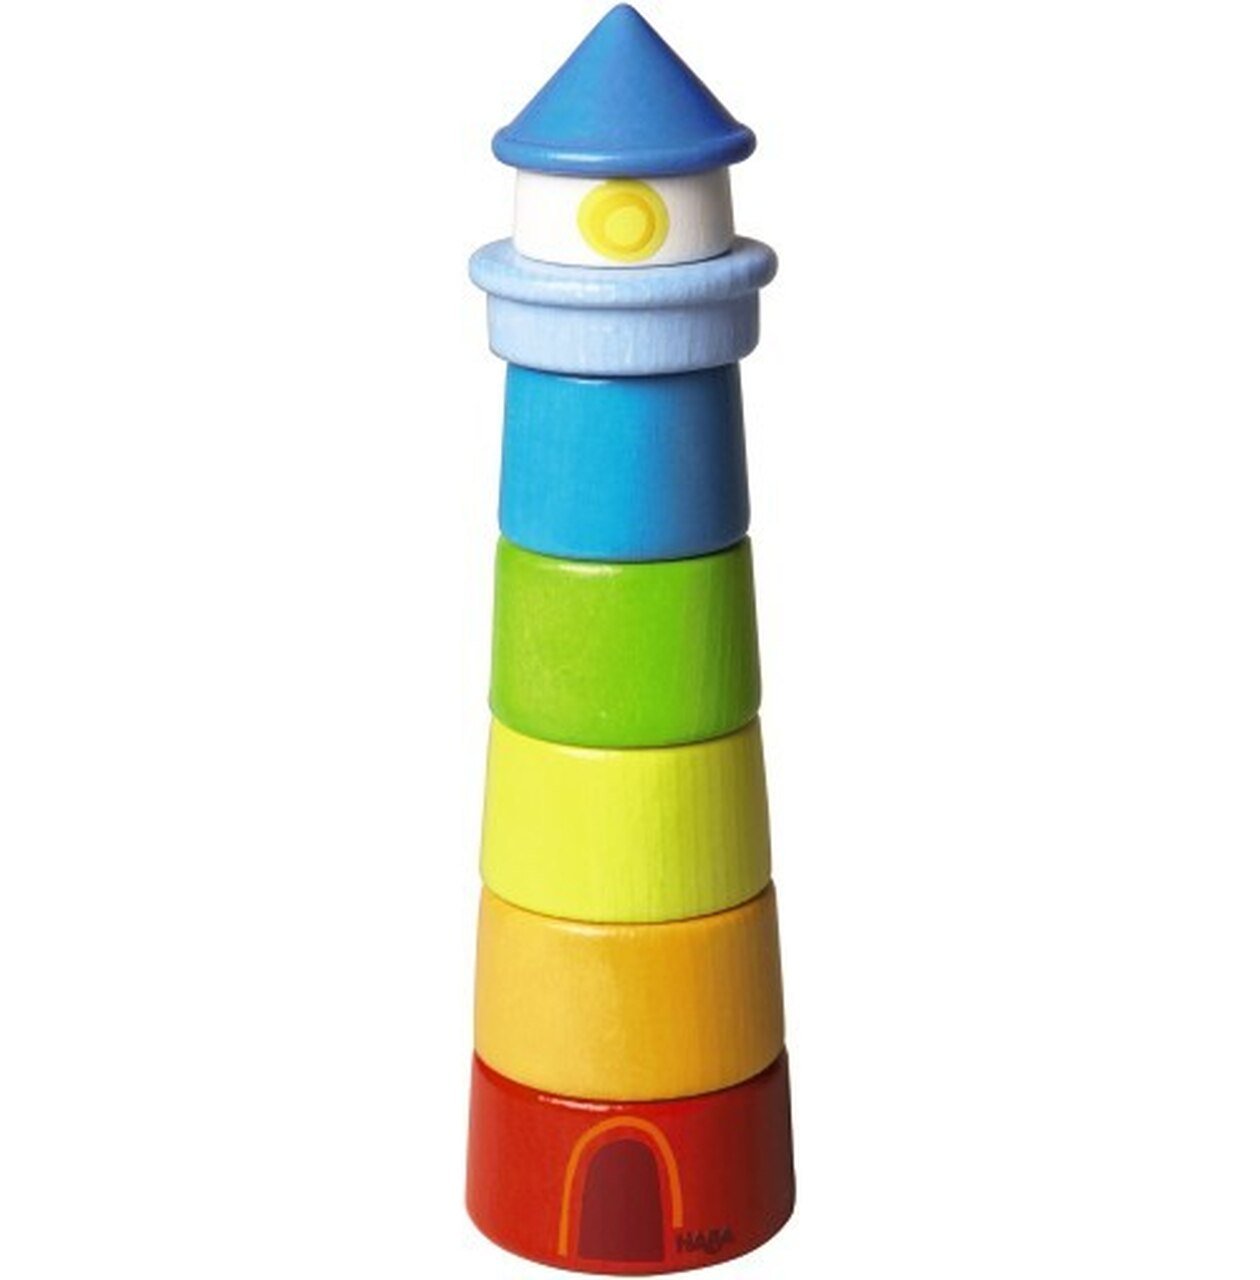 HABA Lighthouse Stacking Game - Wood Wood Toys Canada's Favourite Montessori Toy Store